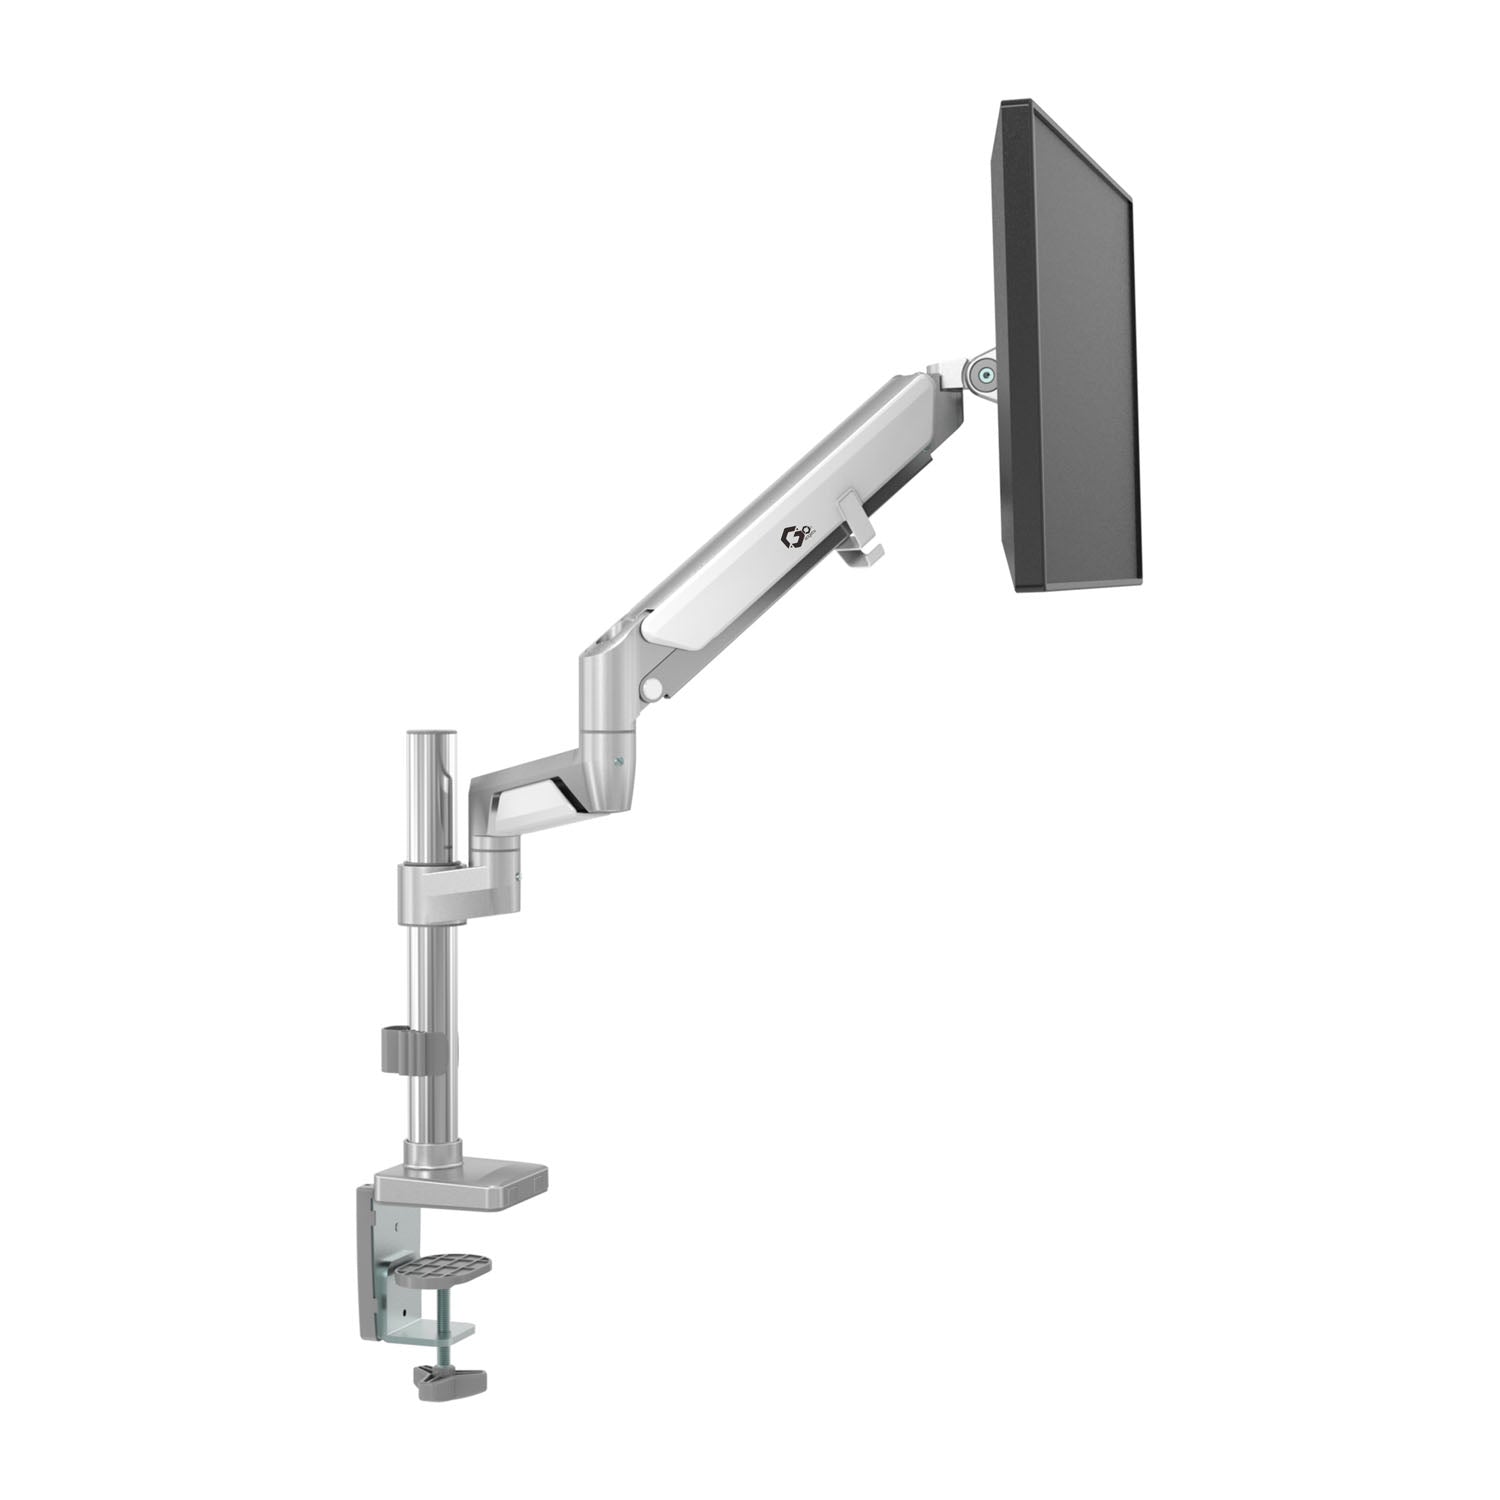 Gadgeton Premium Pole Mounted Single Monitor Arm, Stand And Mount For Gaming And Office Use 17” - 32” Up To 8 KG - Silver